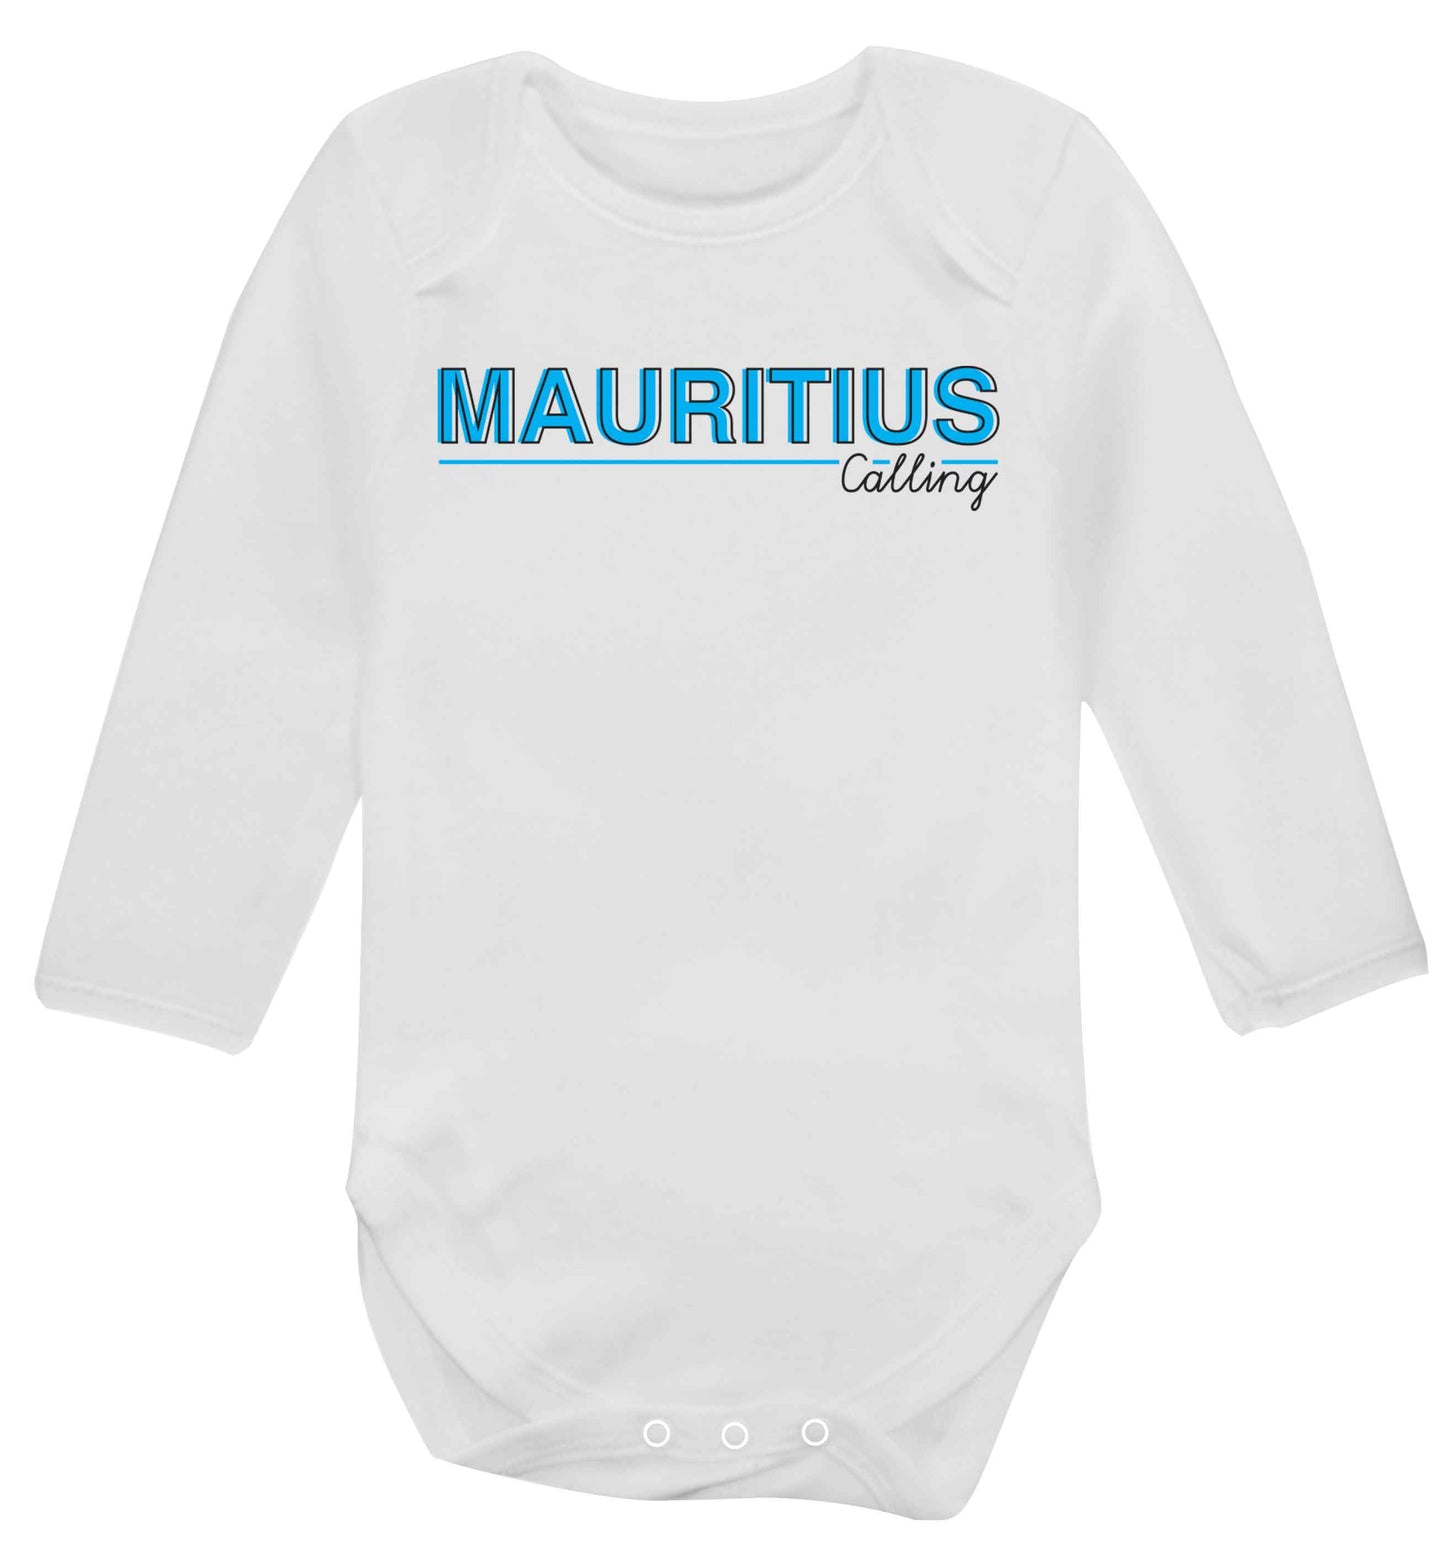 Mauritius calling Baby Vest long sleeved white 6-12 months